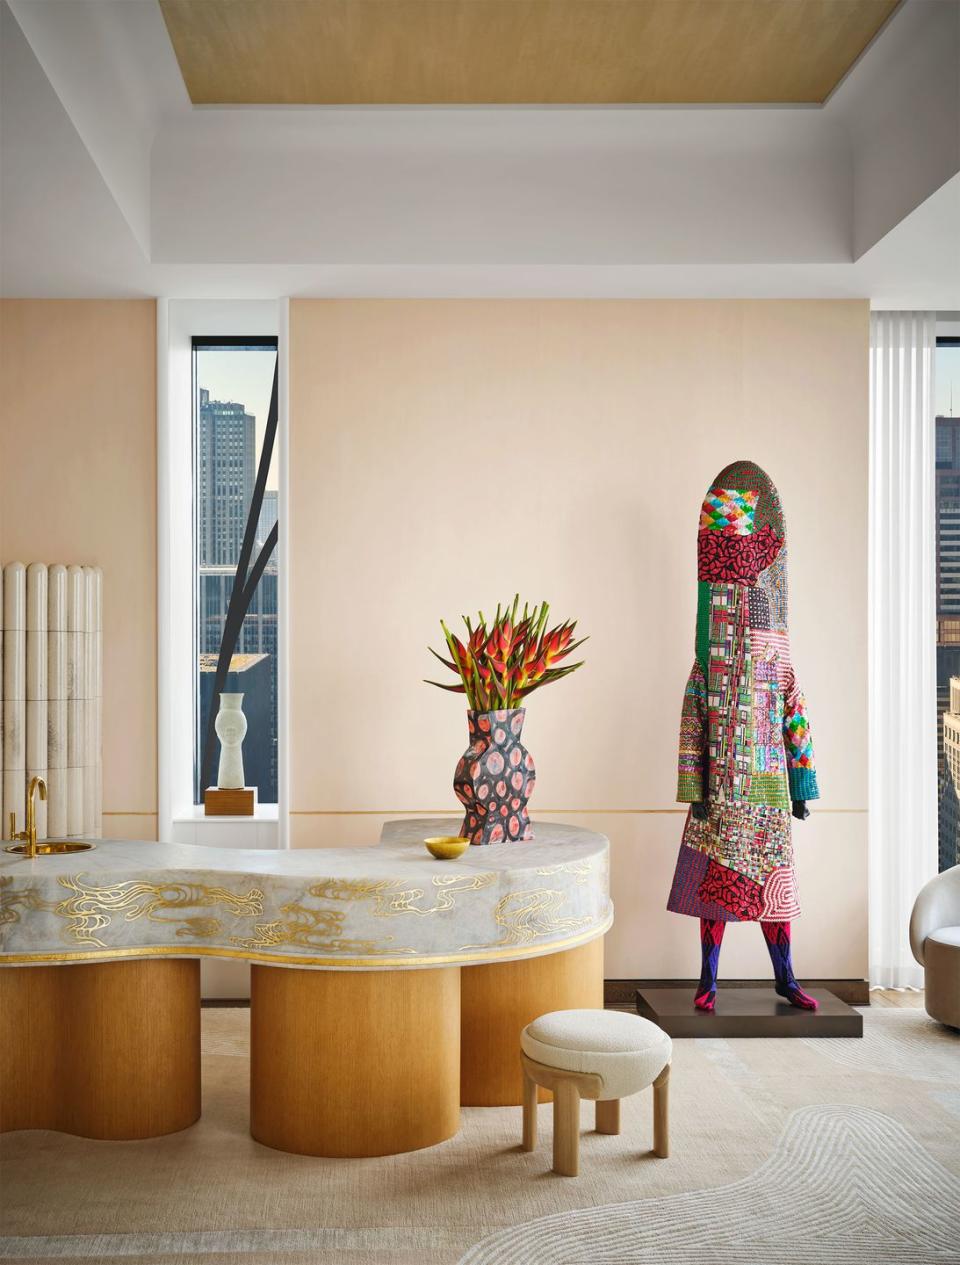 a multicolored human size sculpture stands next to a curved wet bar with a quartzite top and swirly gold pattern, papier mache vase with flowers, narrow window with an artful vase on sill